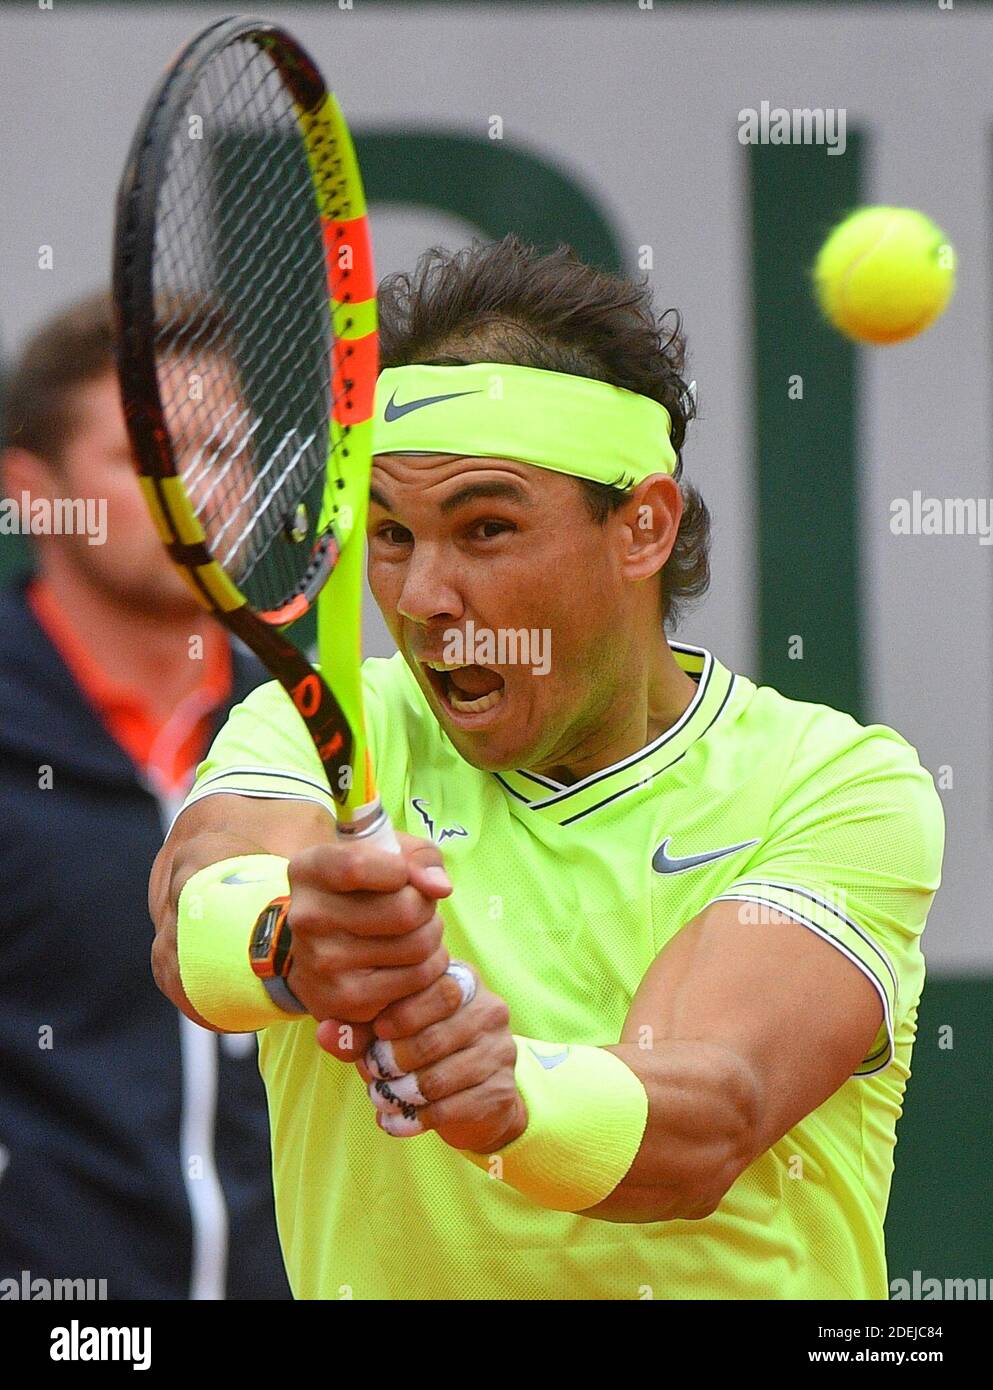 Spain's Rafael Nadal plays against Switzerland's Roger Federer during their  men's singles semi-final match on day 13 of The Roland Garros 2019 French  Open tennis tournament in Paris, France on June 7,